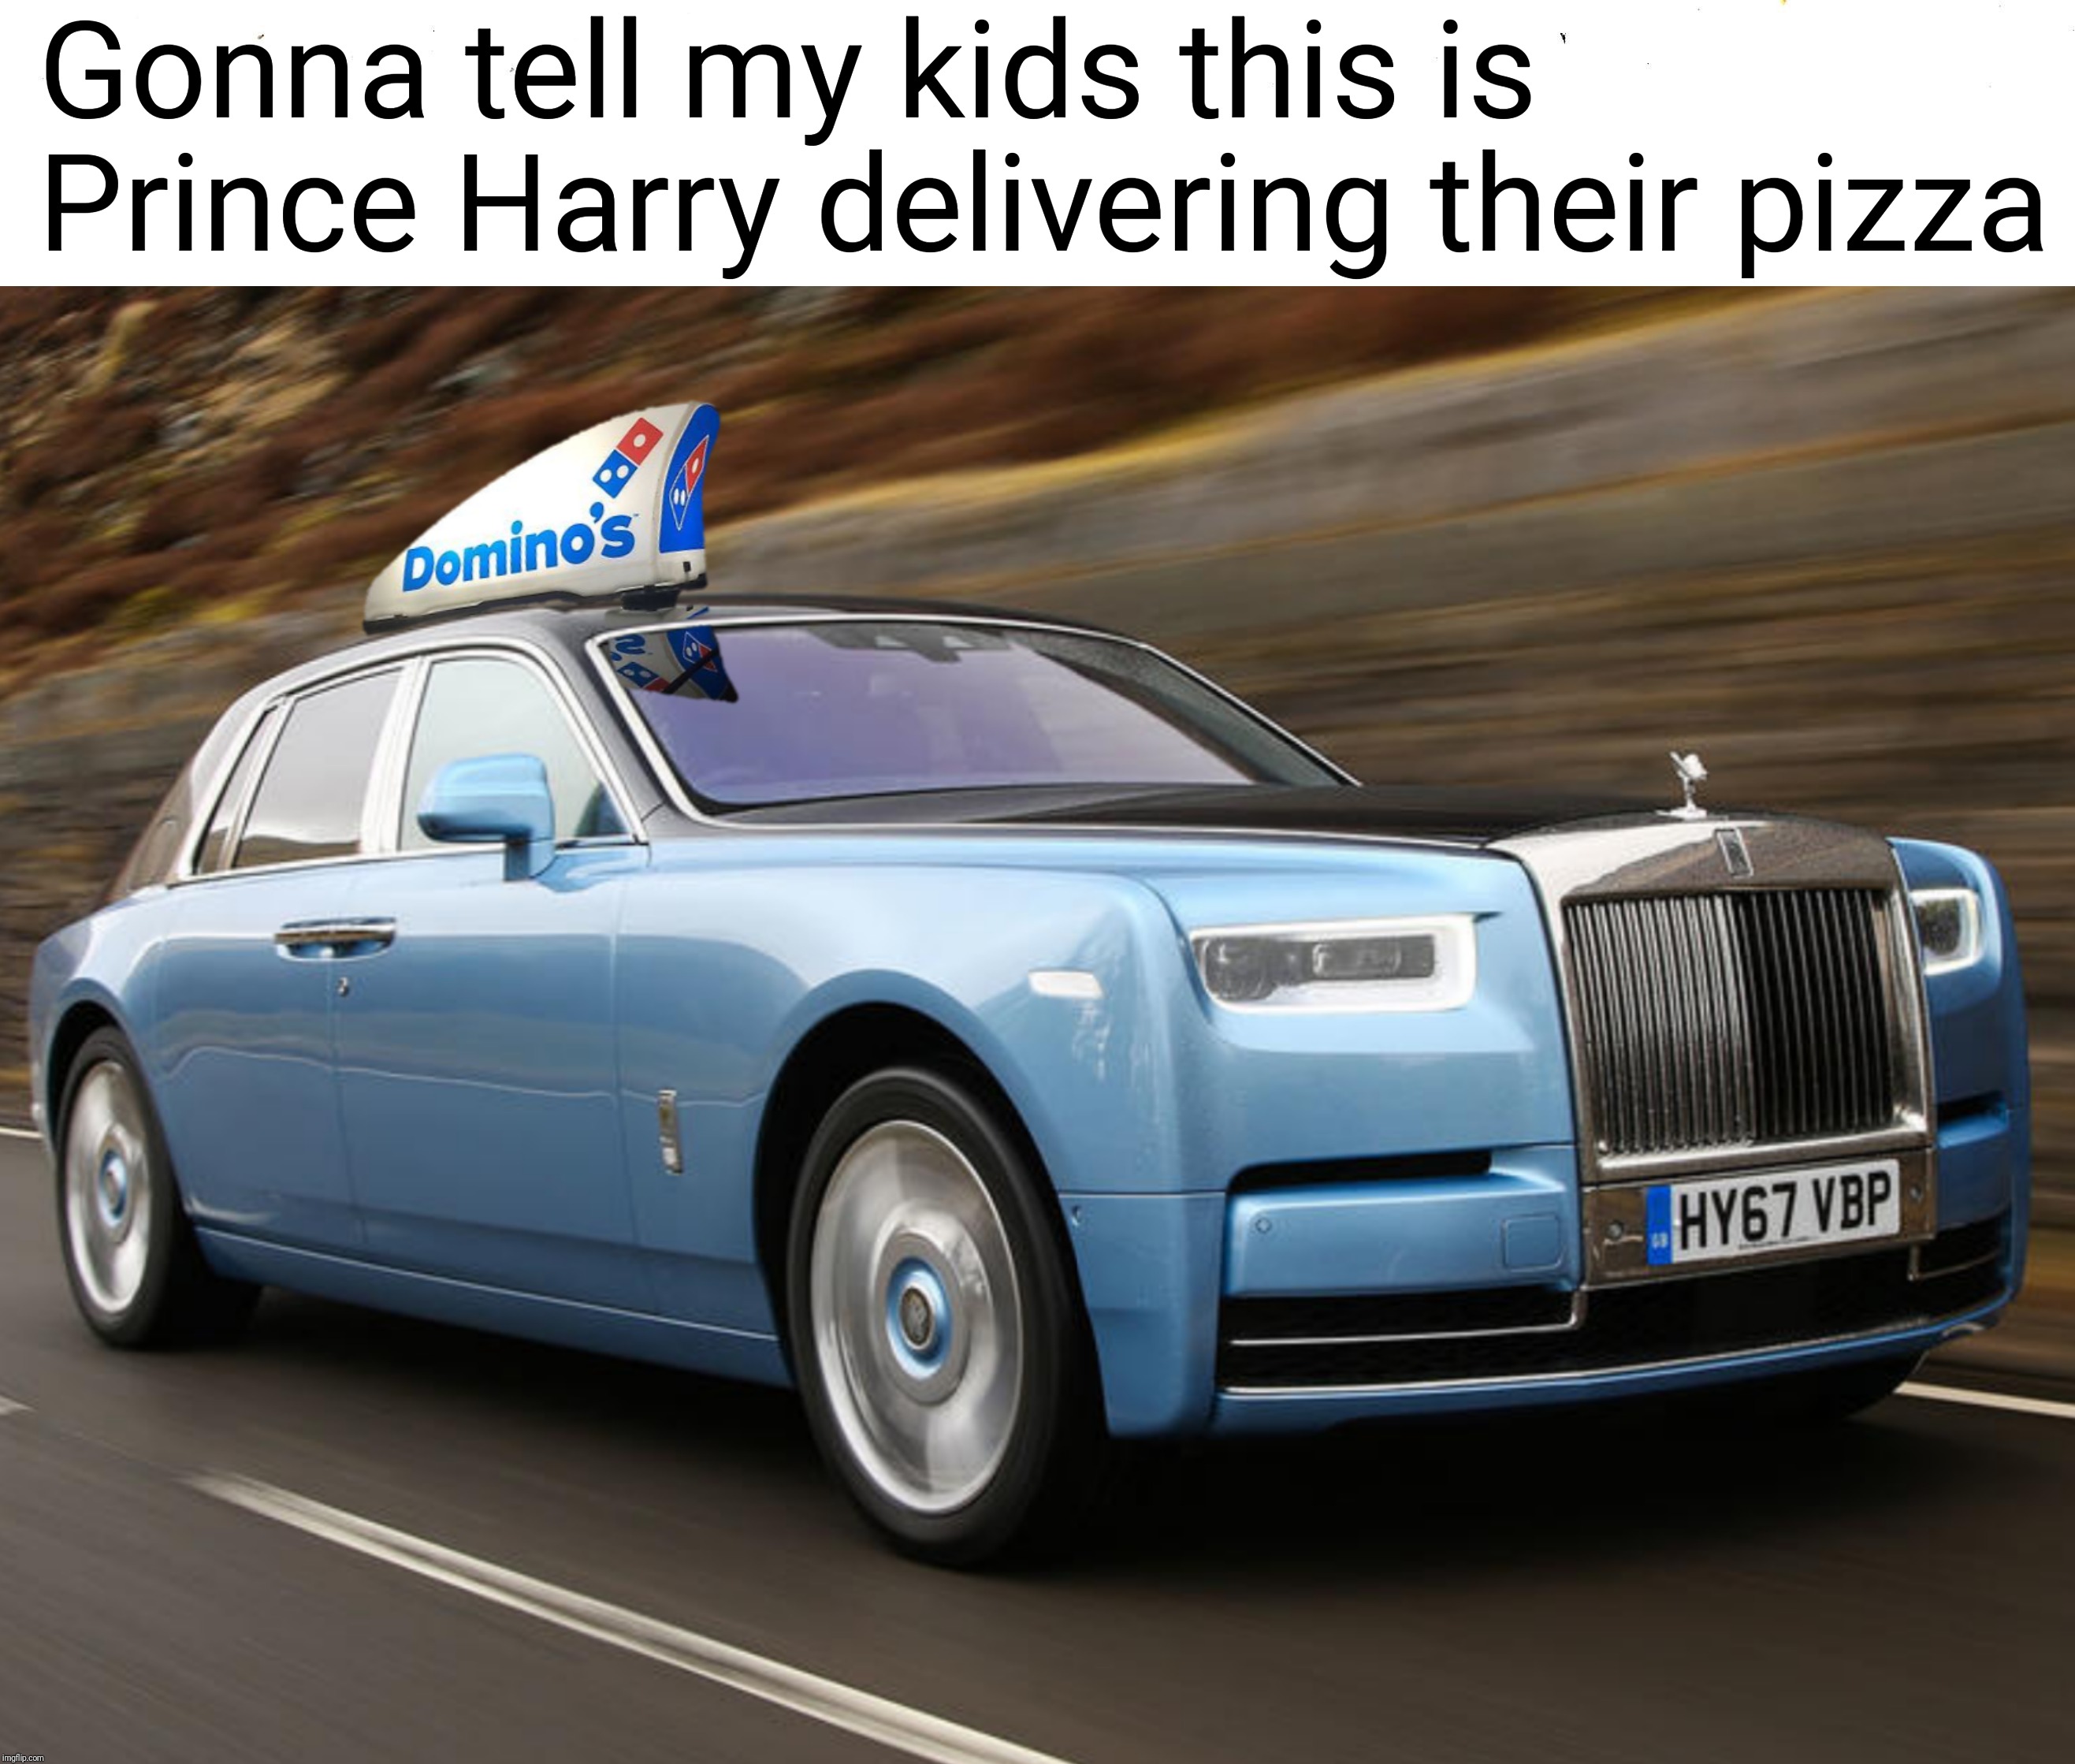 BREAKING: The Duke and Duchess of Sussex announce they will live in N. America, "work to become financially independent” |  Gonna tell my kids this is Prince Harry delivering their pizza | image tagged in prince harry,megan fox,royals,oh the humanity,whatever | made w/ Imgflip meme maker